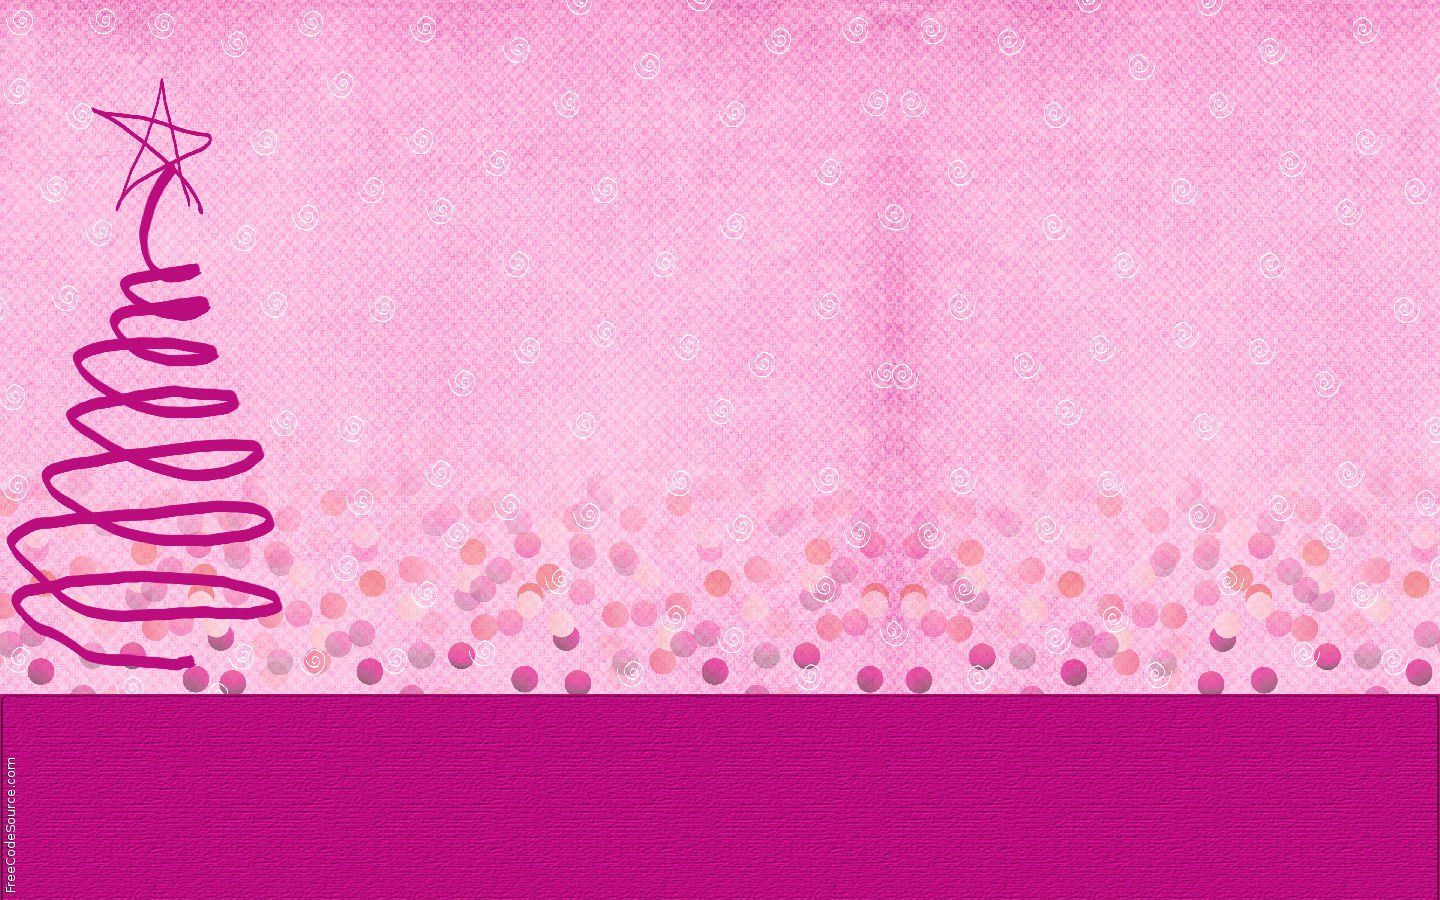 Free download Pink Christmas Formspring Background Pink Christmas Formspring [1440x900] for your Desktop, Mobile & Tablet. Explore Girly Christmas Wallpaper. Cute Wallpaper for Laptops, Wallpaper for Girls Room, Girly